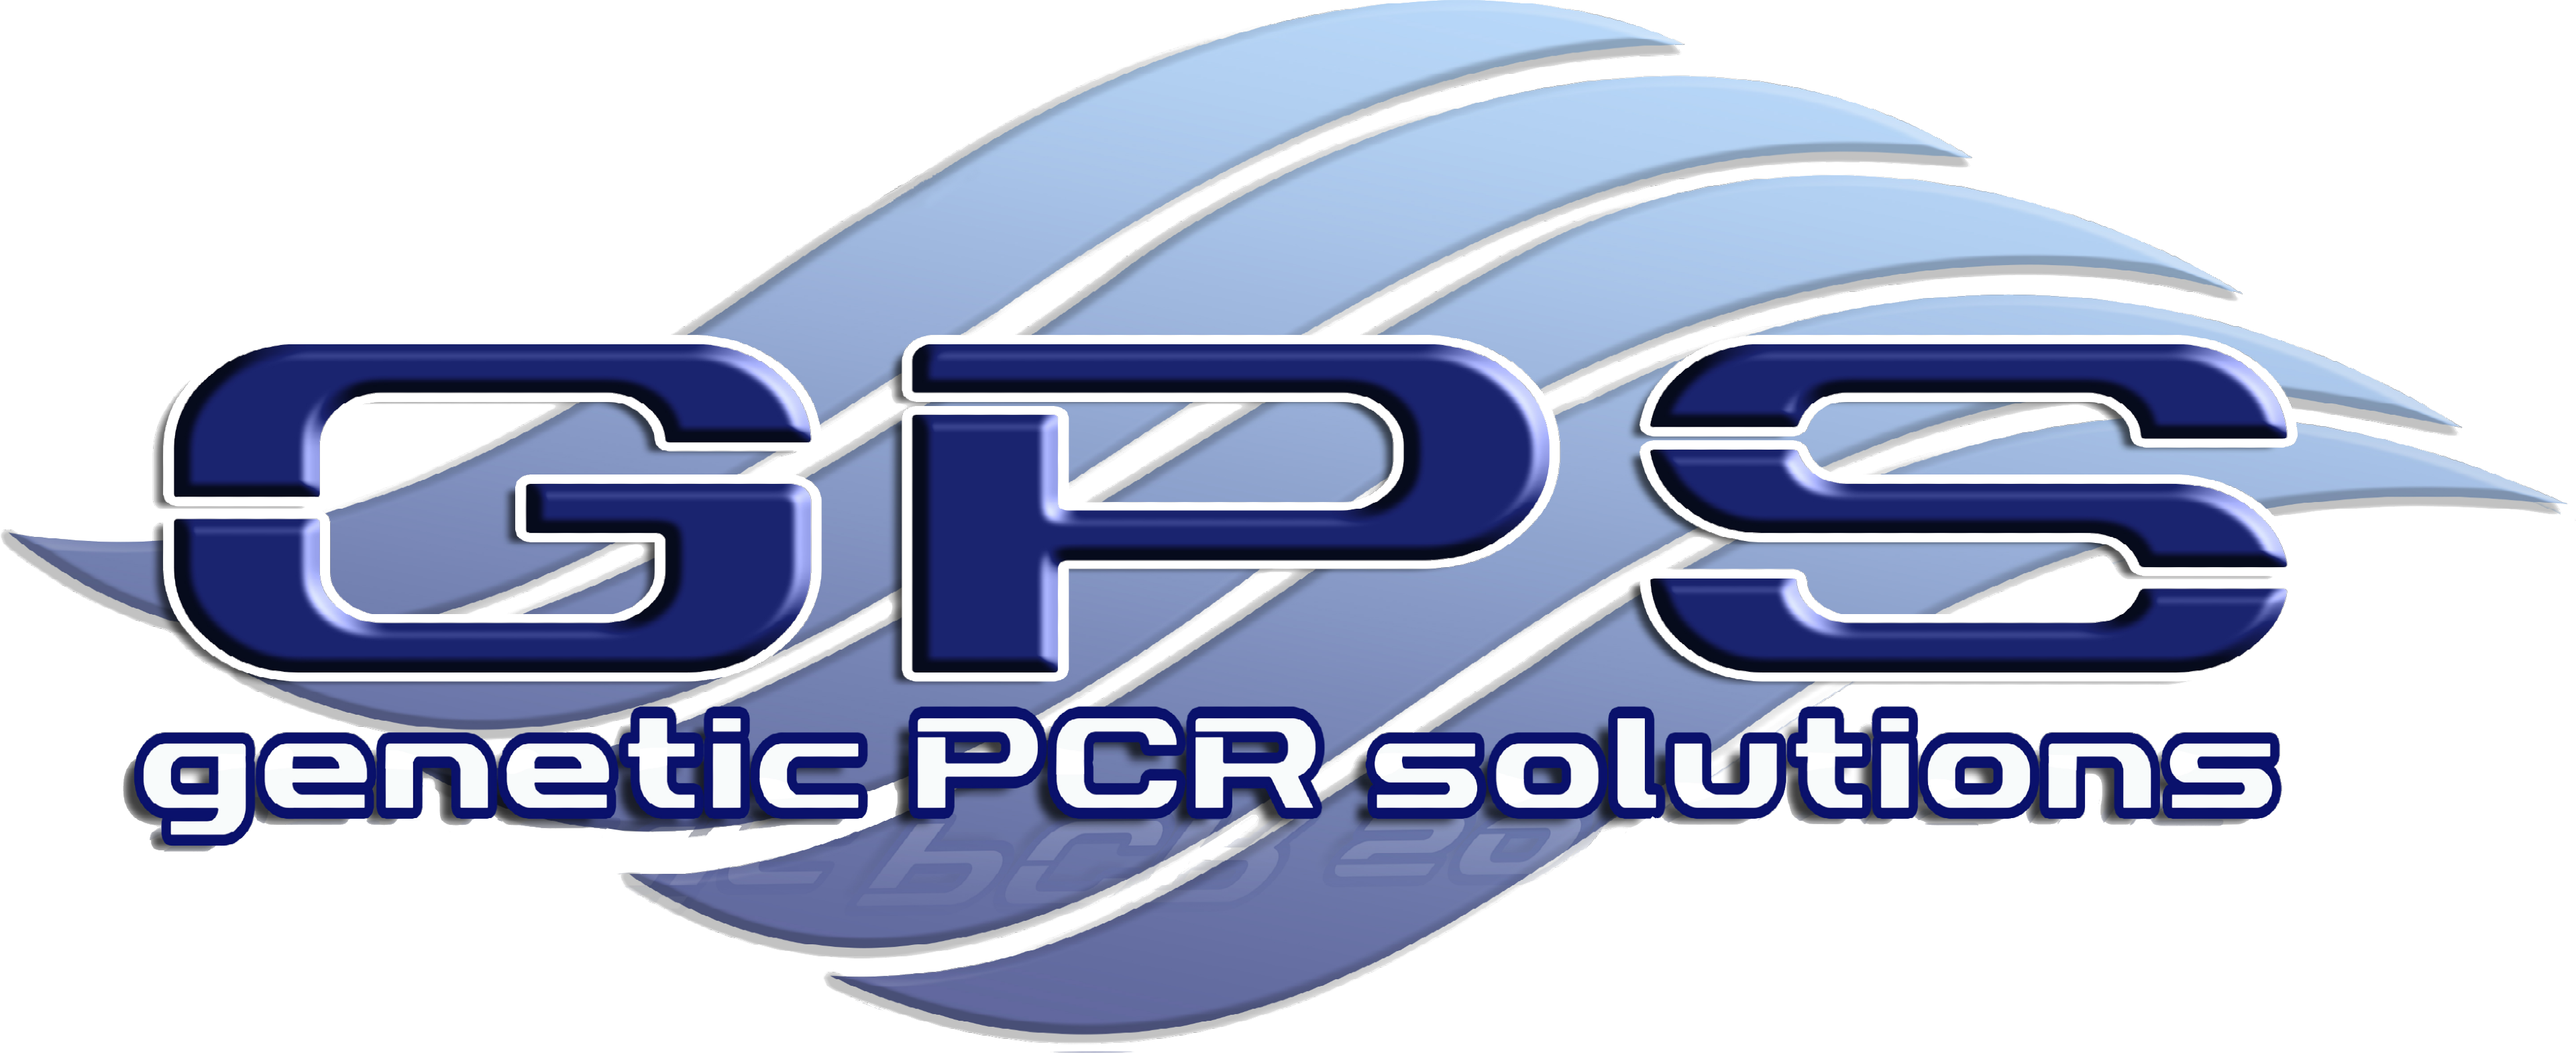 GPS - Genetic PCR Solutions